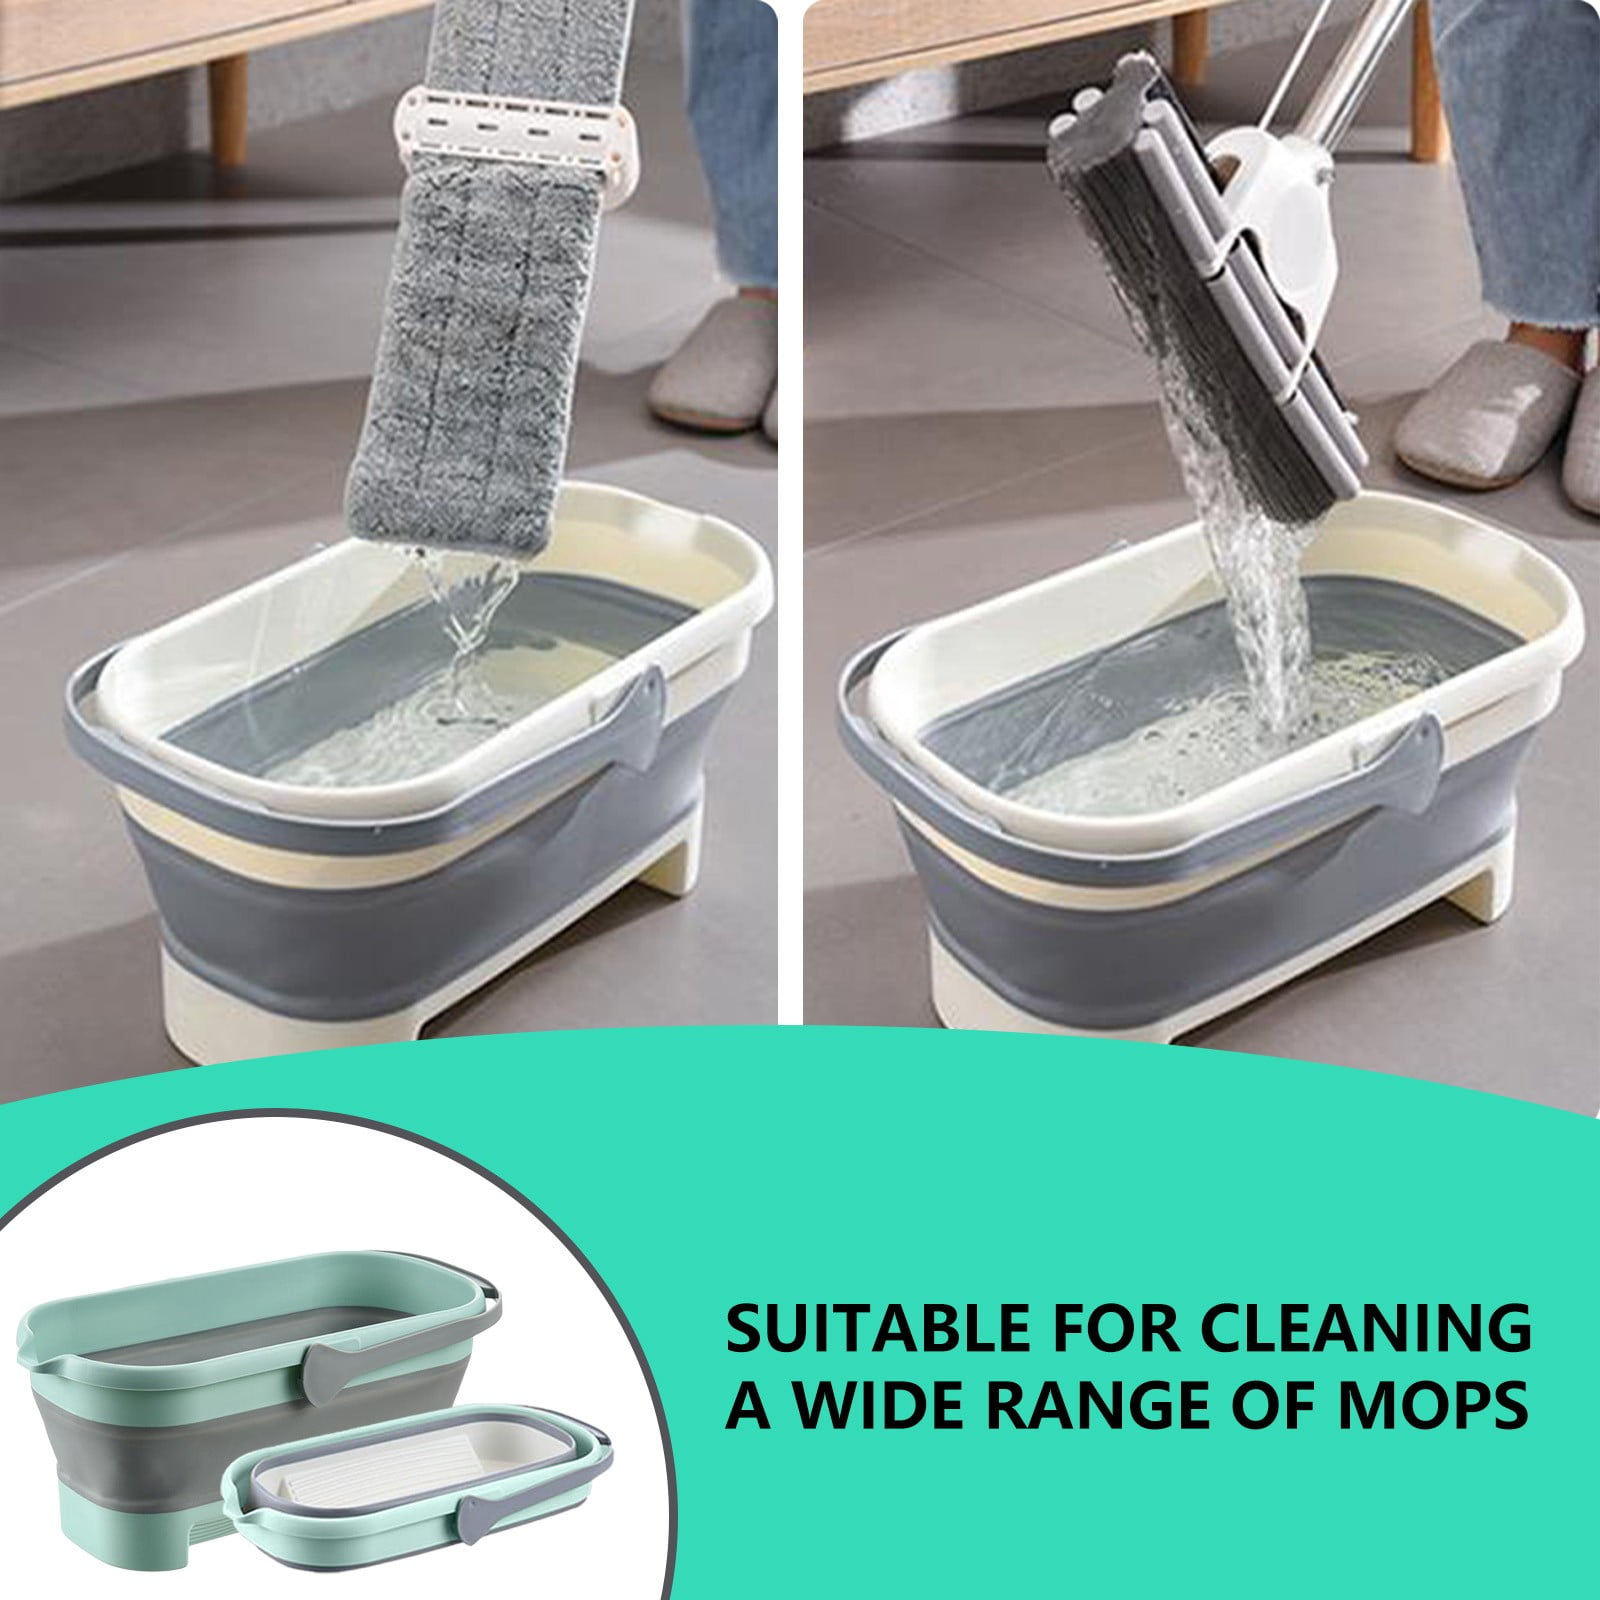  Collapsiable Mop Bucket, Collapsible Bucket with Wheels and  Dual Handles, 12L/3.17 Gallon Multi-Purpose Washing Collapsible Bucket,  Portable and Handy Mop Bucket for Effortless House Cleaning : Health &  Household